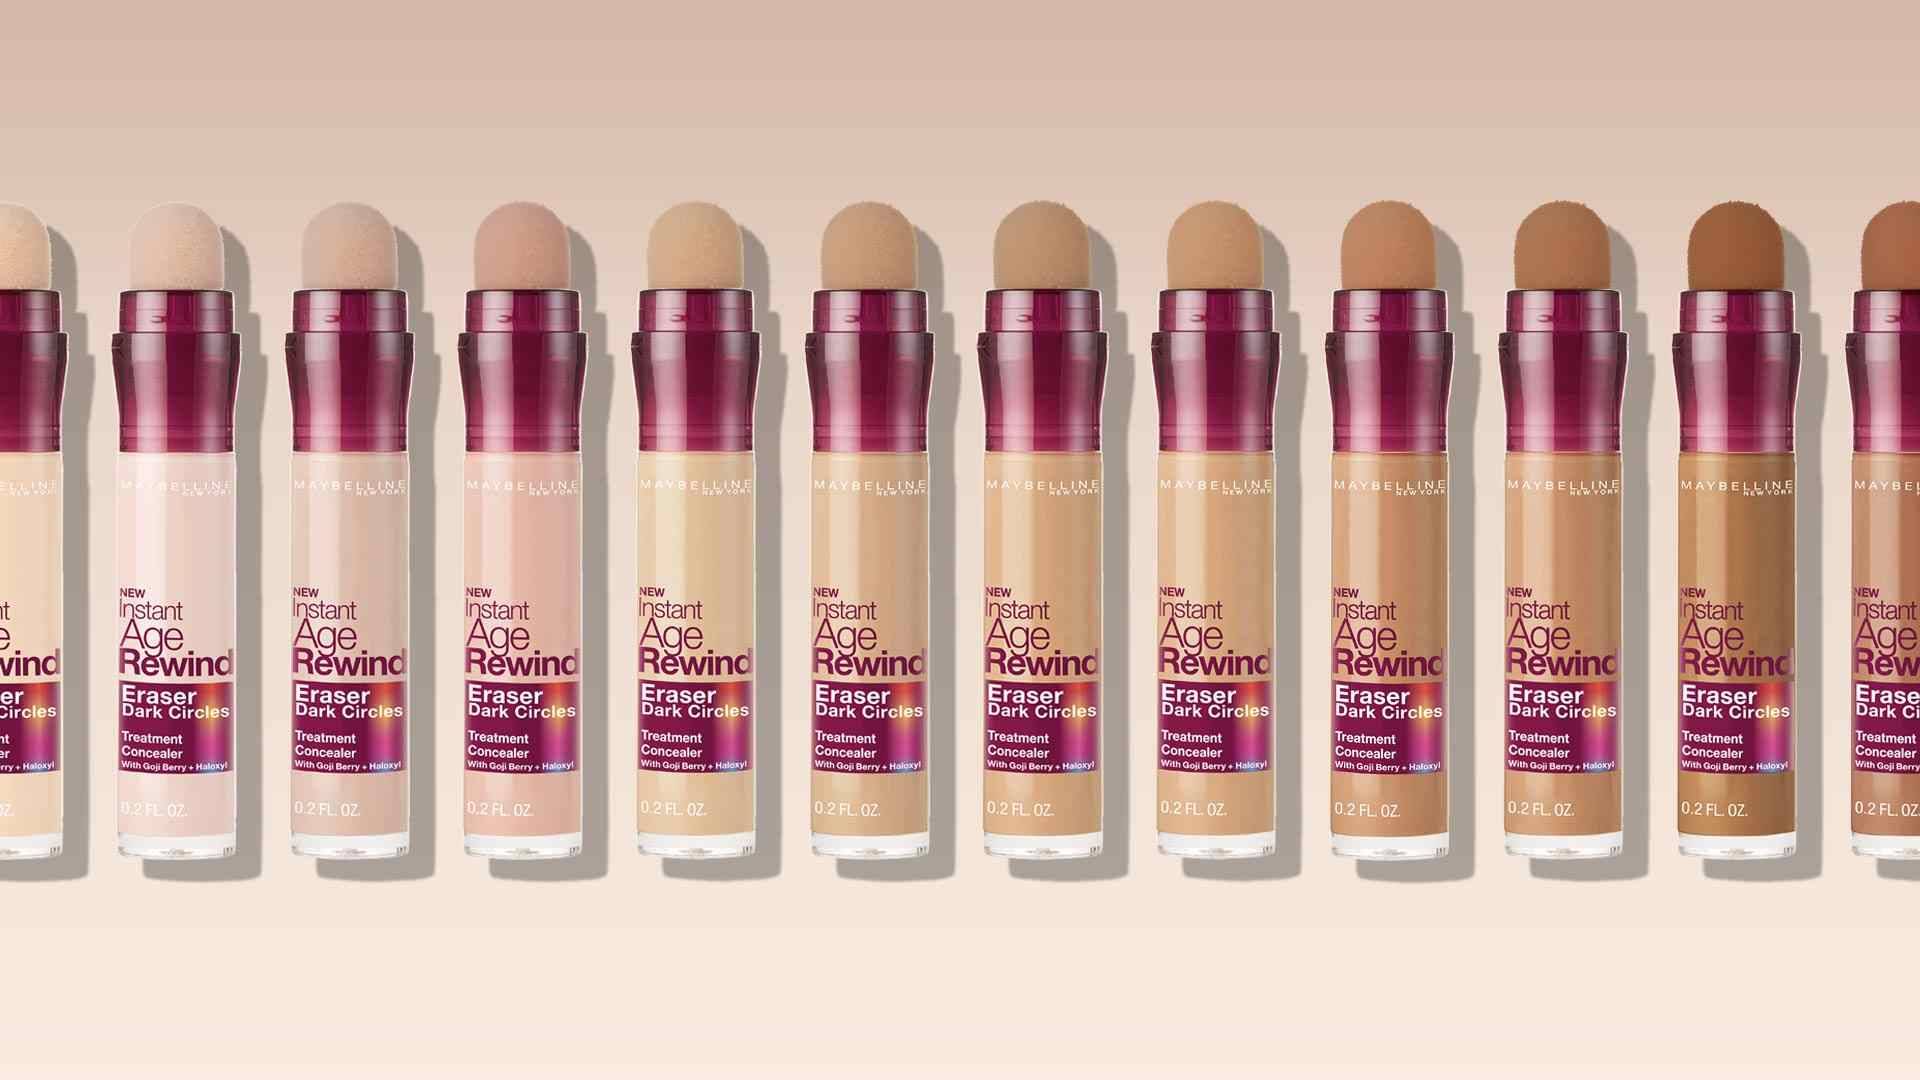 maybelline-iar-concealer-more-shades-than-ever-video-promoted